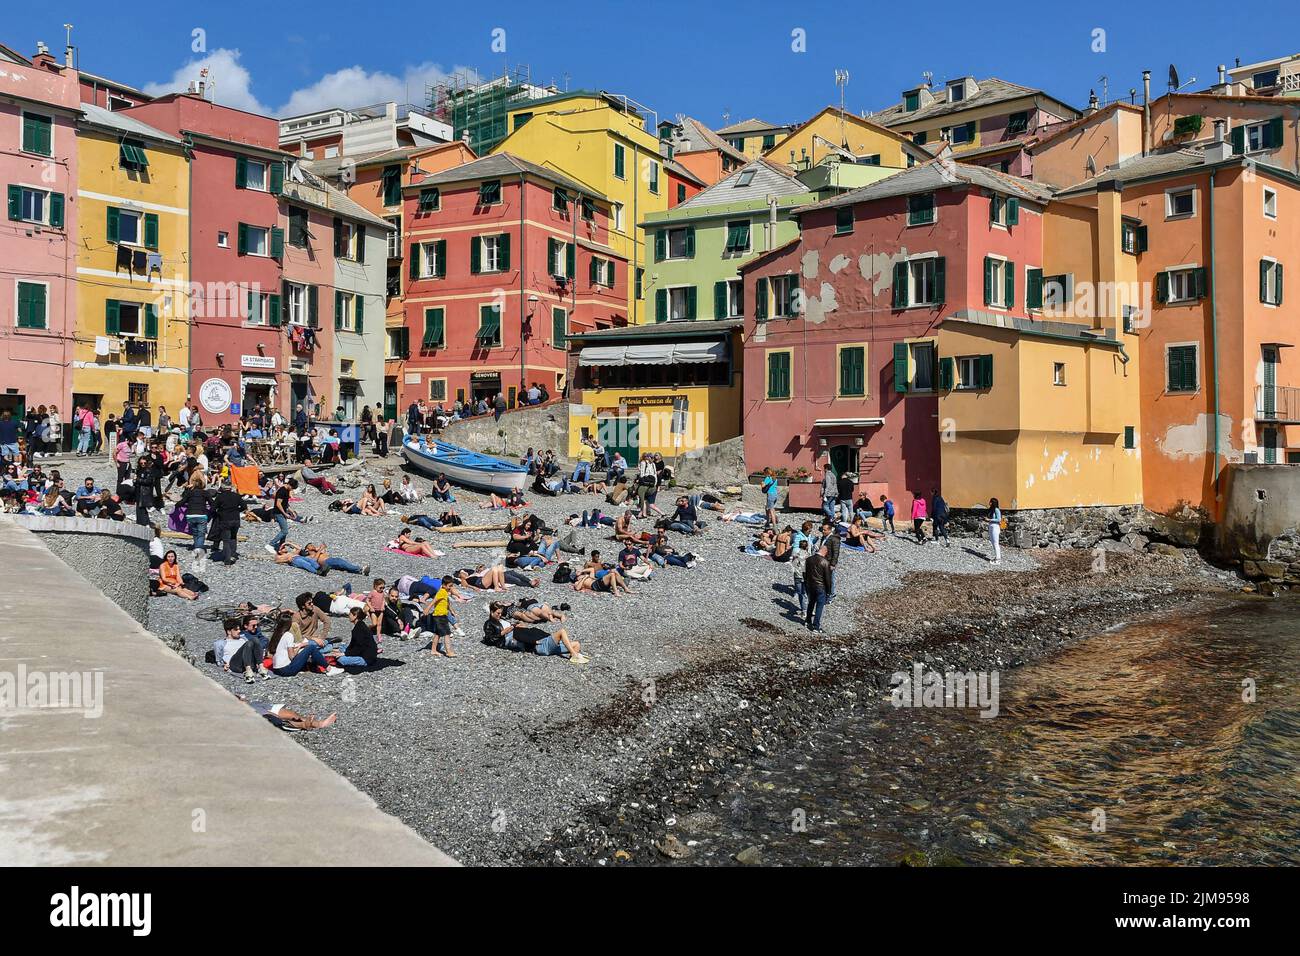 View of the small beach of the old fishing village crowded with tourists on Easter Monday, Boccadasse, Genoa, Liguria, Italy Stock Photo